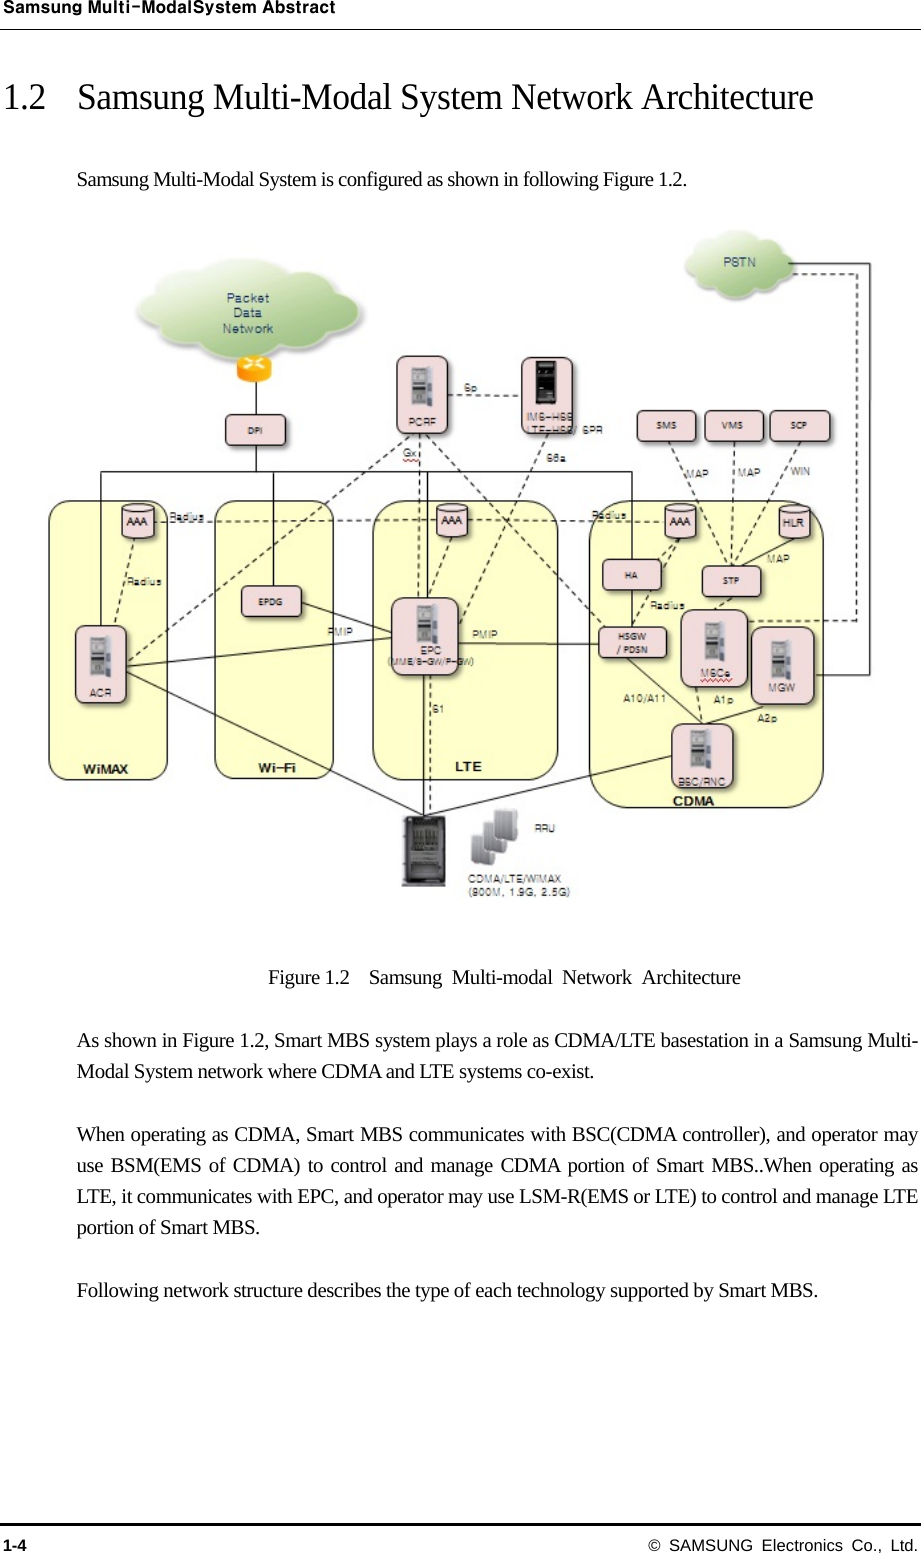 Samsung Multi-ModalSystem Abstract 1-4 © SAMSUNG Electronics Co., Ltd. 1.2 Samsung Multi-Modal System Network Architecture  Samsung Multi-Modal System is configured as shown in following Figure 1.2.   Figure 1.2  Samsung Multi-modal Network Architecture  As shown in Figure 1.2, Smart MBS system plays a role as CDMA/LTE basestation in a Samsung Multi-Modal System network where CDMA and LTE systems co-exist.      When operating as CDMA, Smart MBS communicates with BSC(CDMA controller), and operator may use BSM(EMS of CDMA) to control and manage CDMA portion of Smart MBS..When operating as LTE, it communicates with EPC, and operator may use LSM-R(EMS or LTE) to control and manage LTE portion of Smart MBS.  Following network structure describes the type of each technology supported by Smart MBS.    